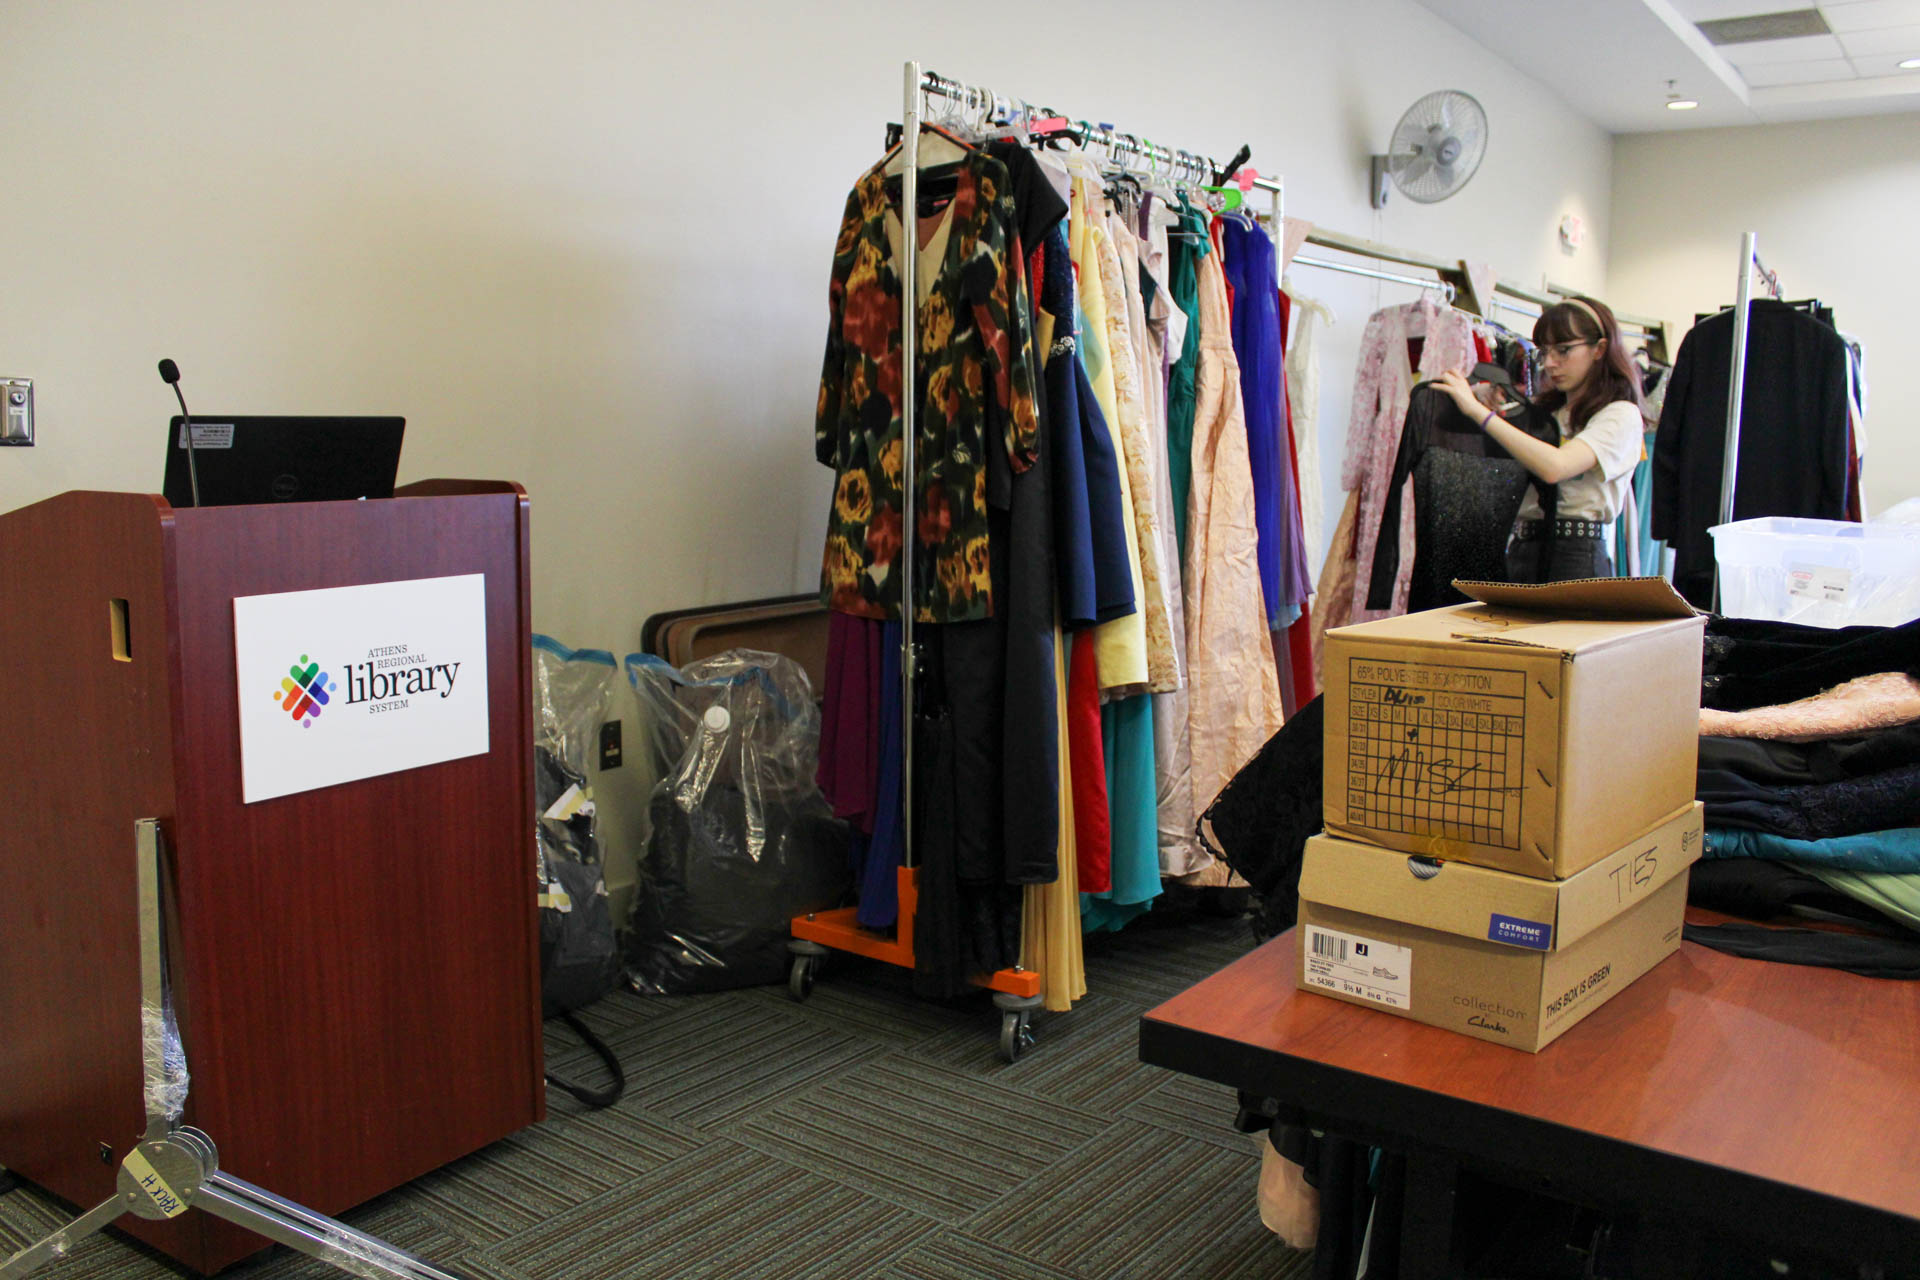 Jess Patrick helps organize clothing for the ACC Library's Bling Your Prom Event